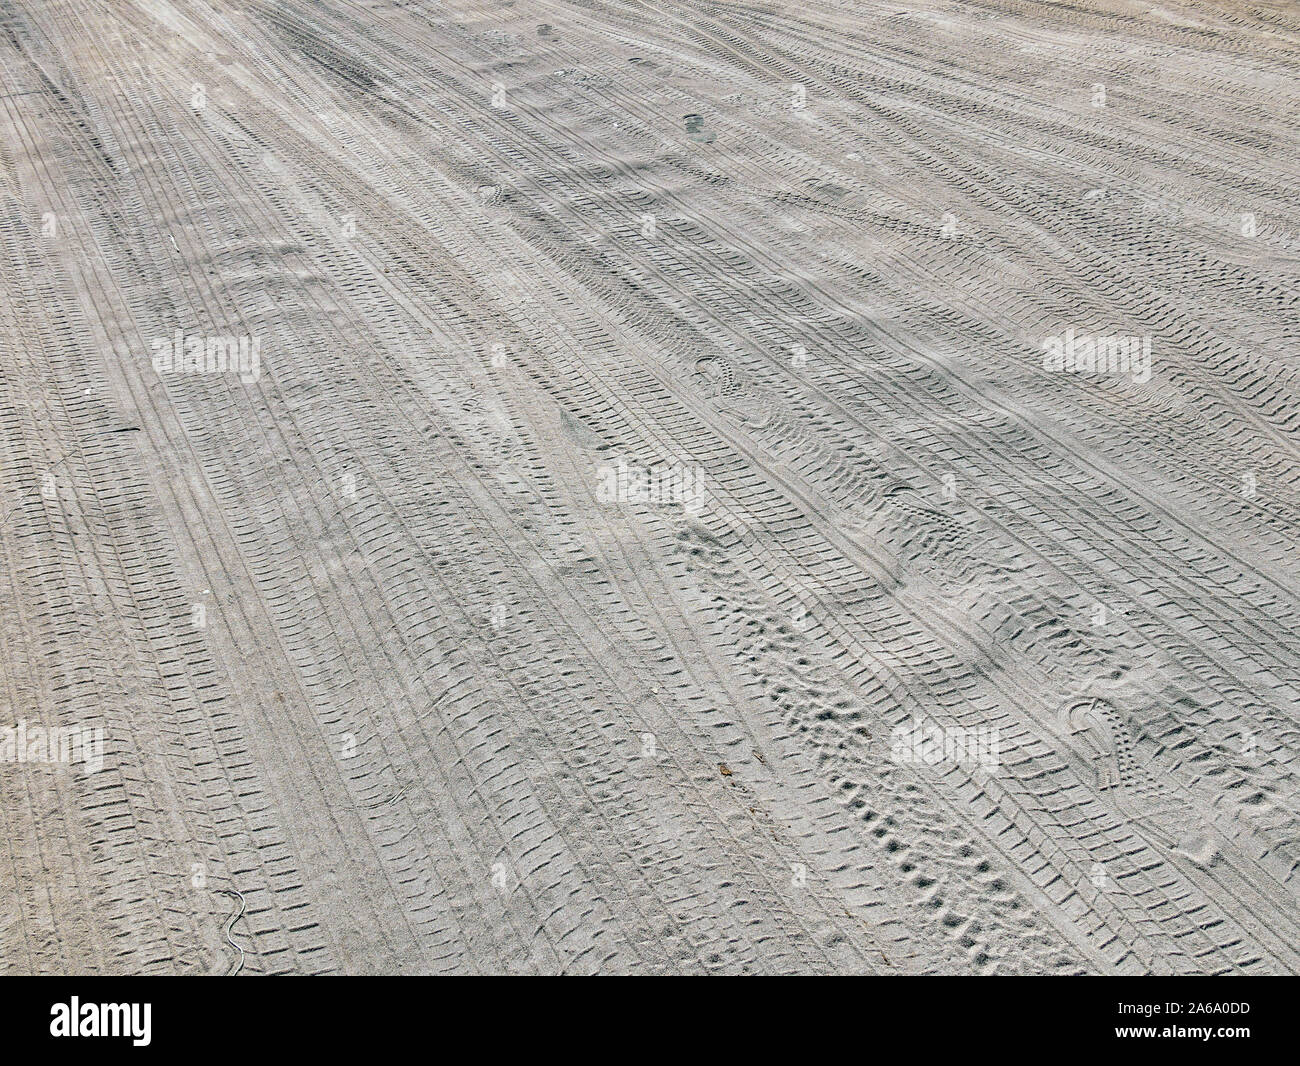 Sandy road. Traces of different tires printed in the sand. Human steps. Closeup photo. Stock Photo